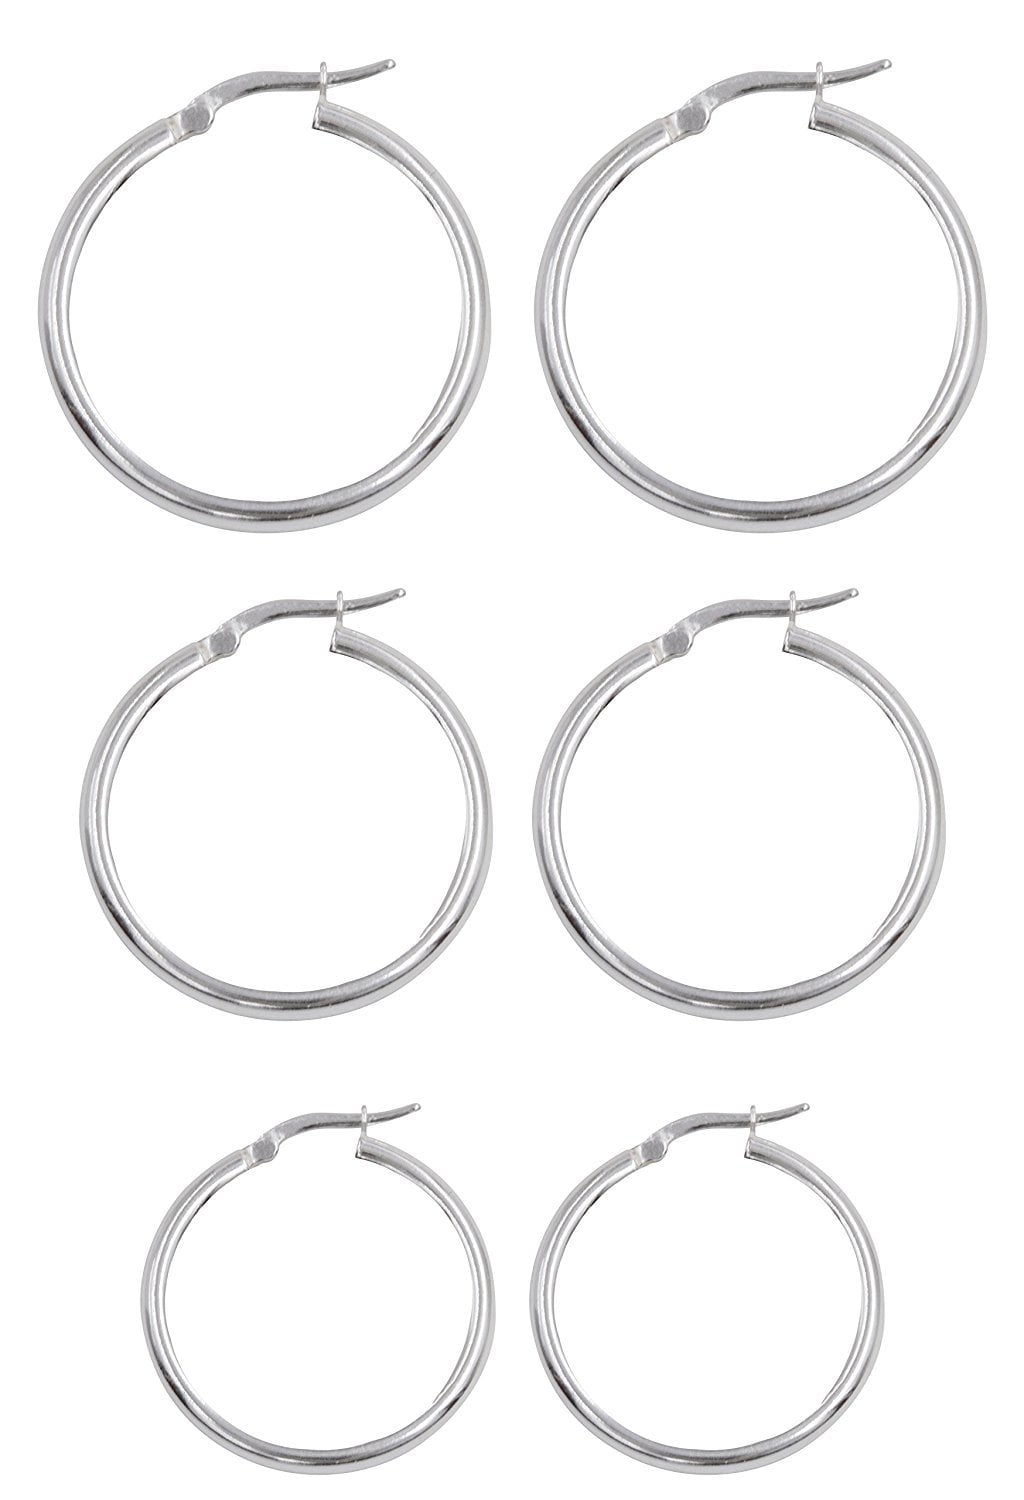 SilverLuxe Sterling Silver 2mm Hoops, Set of 3 Sizes, 25mm, 30mm and 40mm